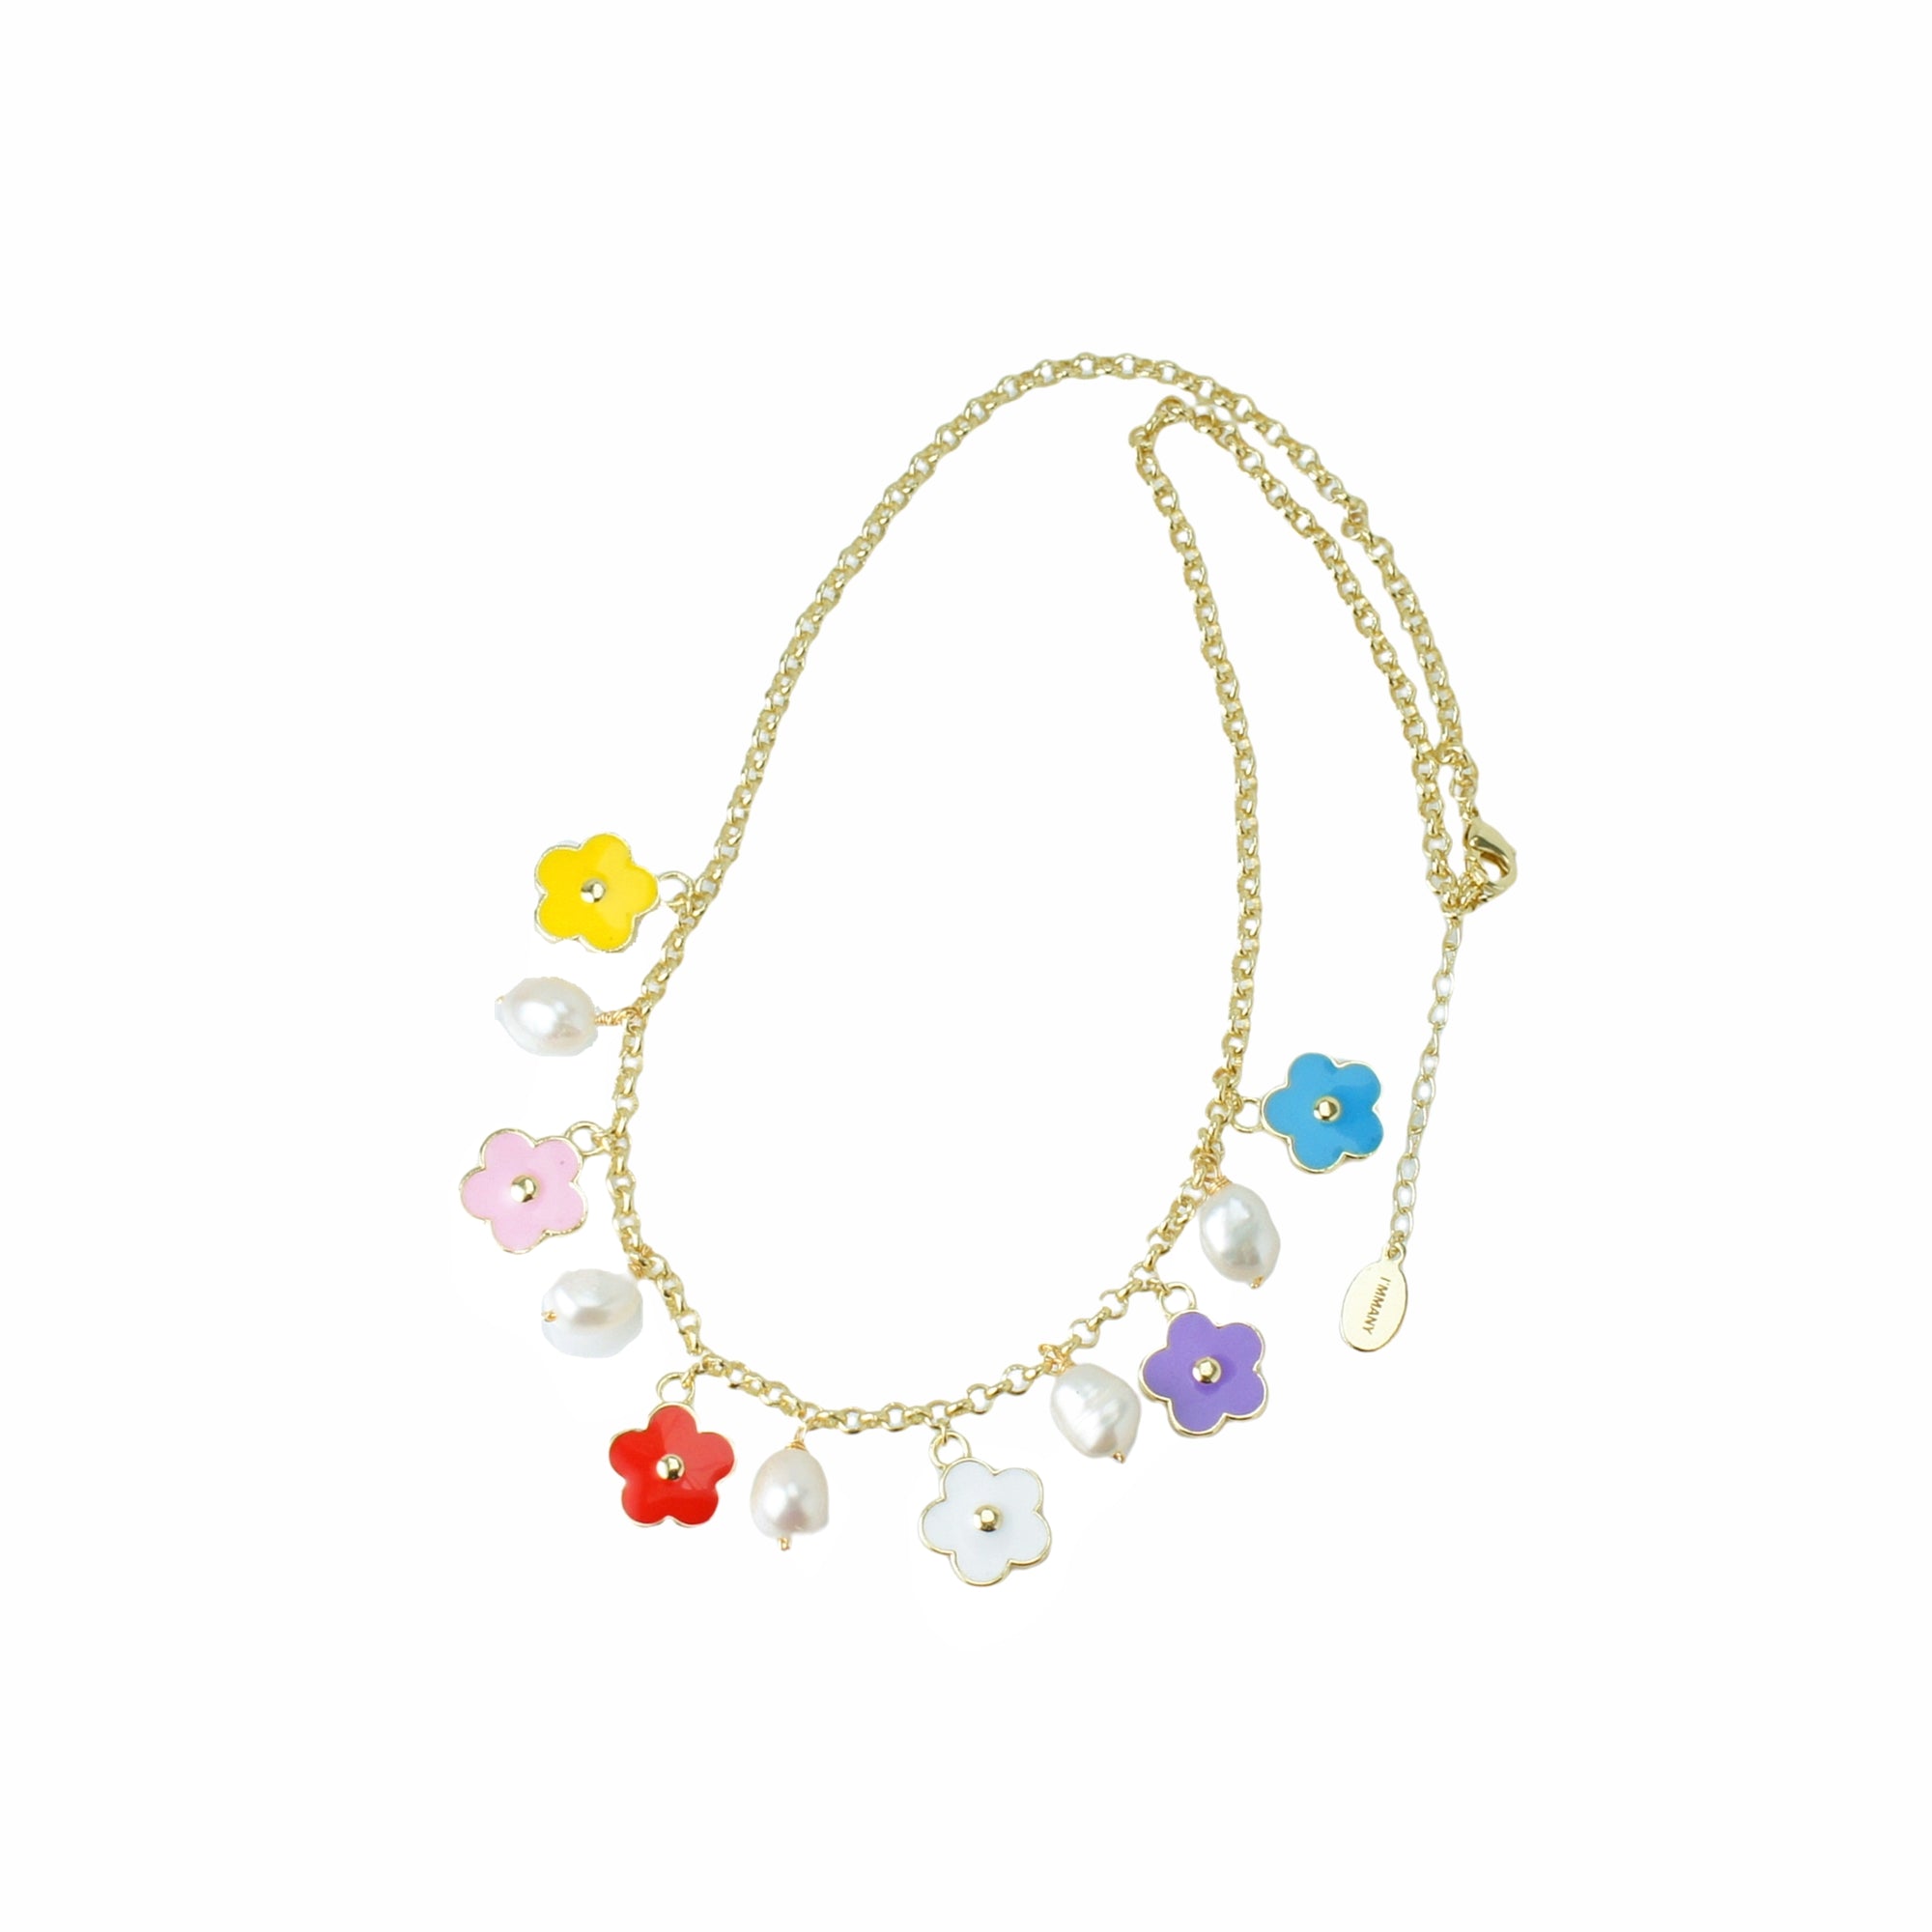 Flower Power Chain Necklace with Enamel Flower Charms